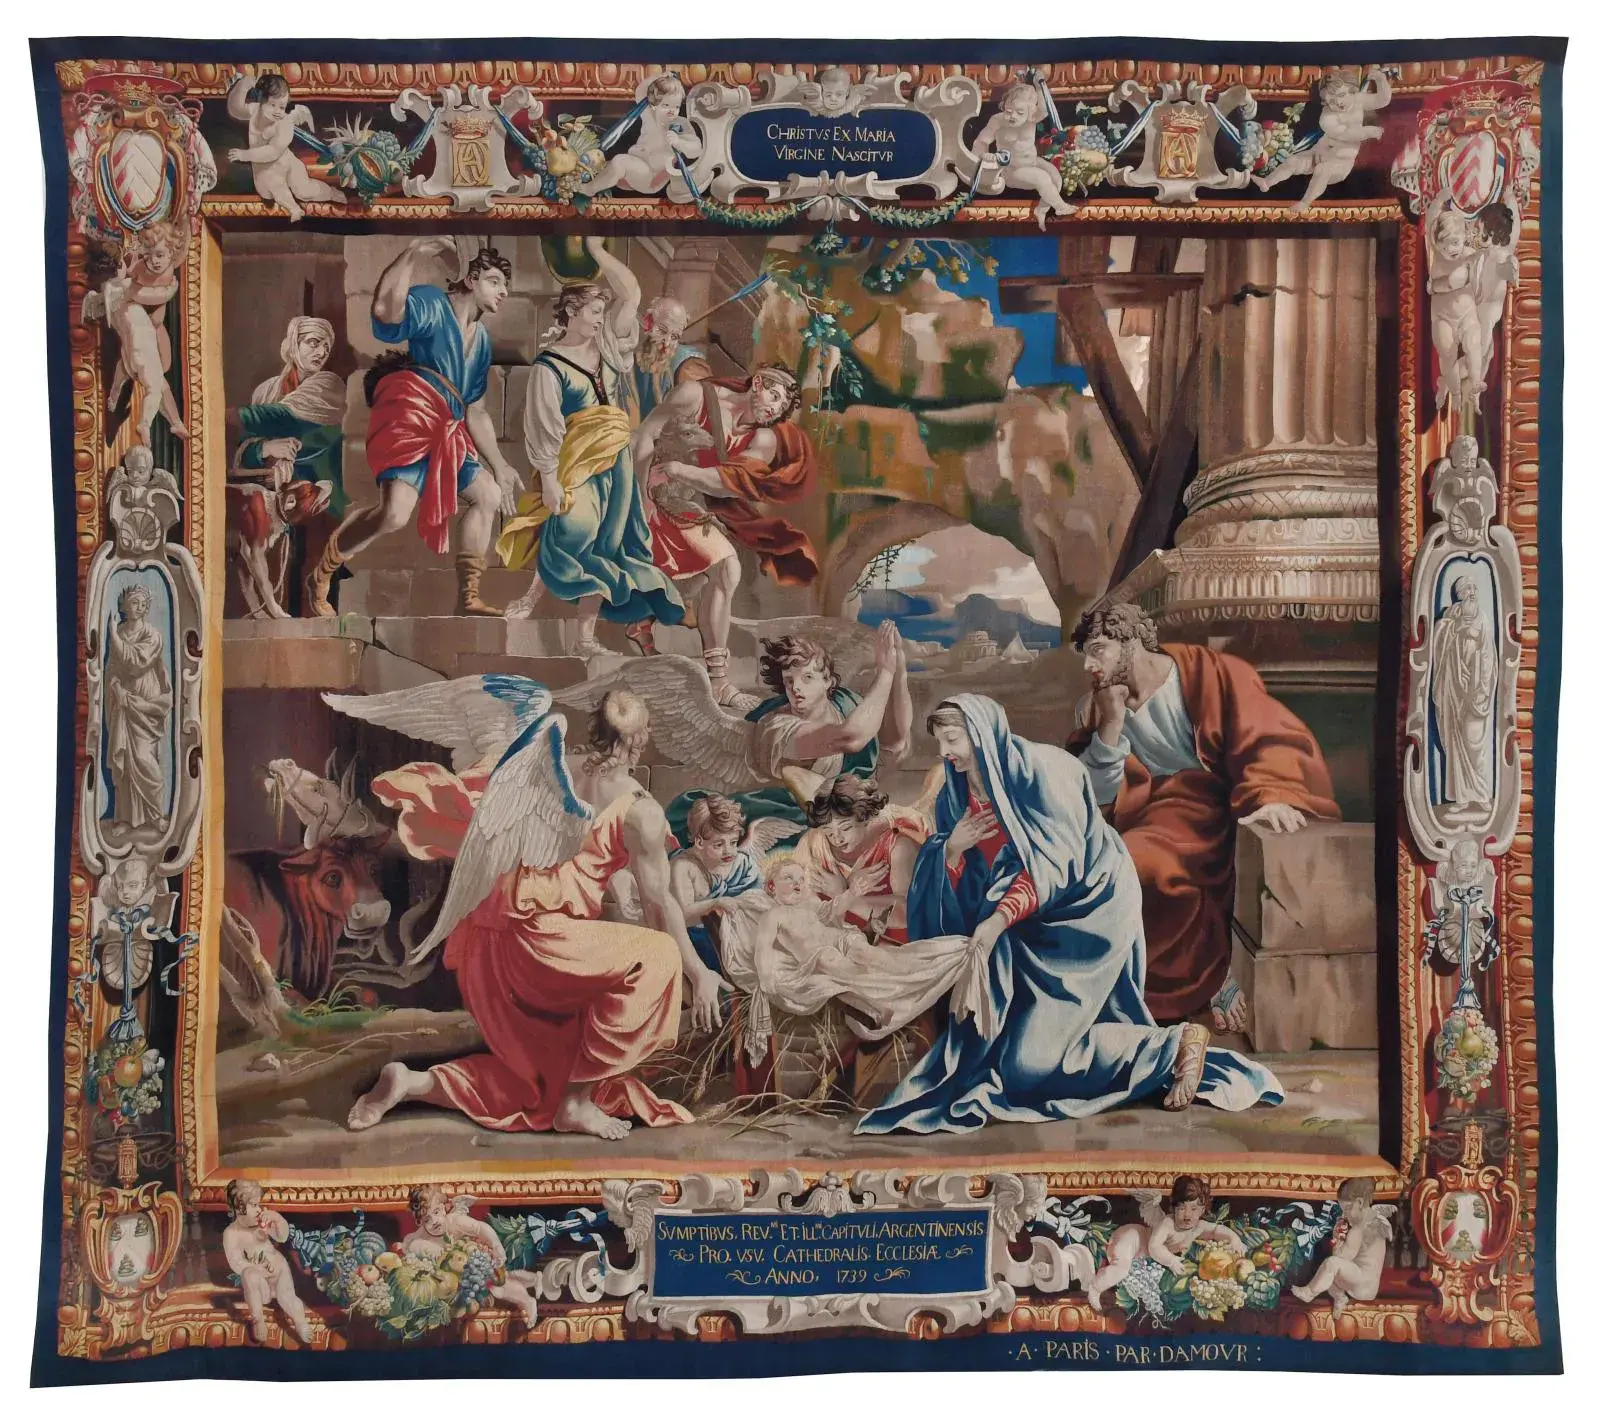 Pierre Damour’s studio, based on a work by Charles Poërson (1609-1667), The Nativity, 1652-1654.
© Mobilier National/Isabelle Bideau